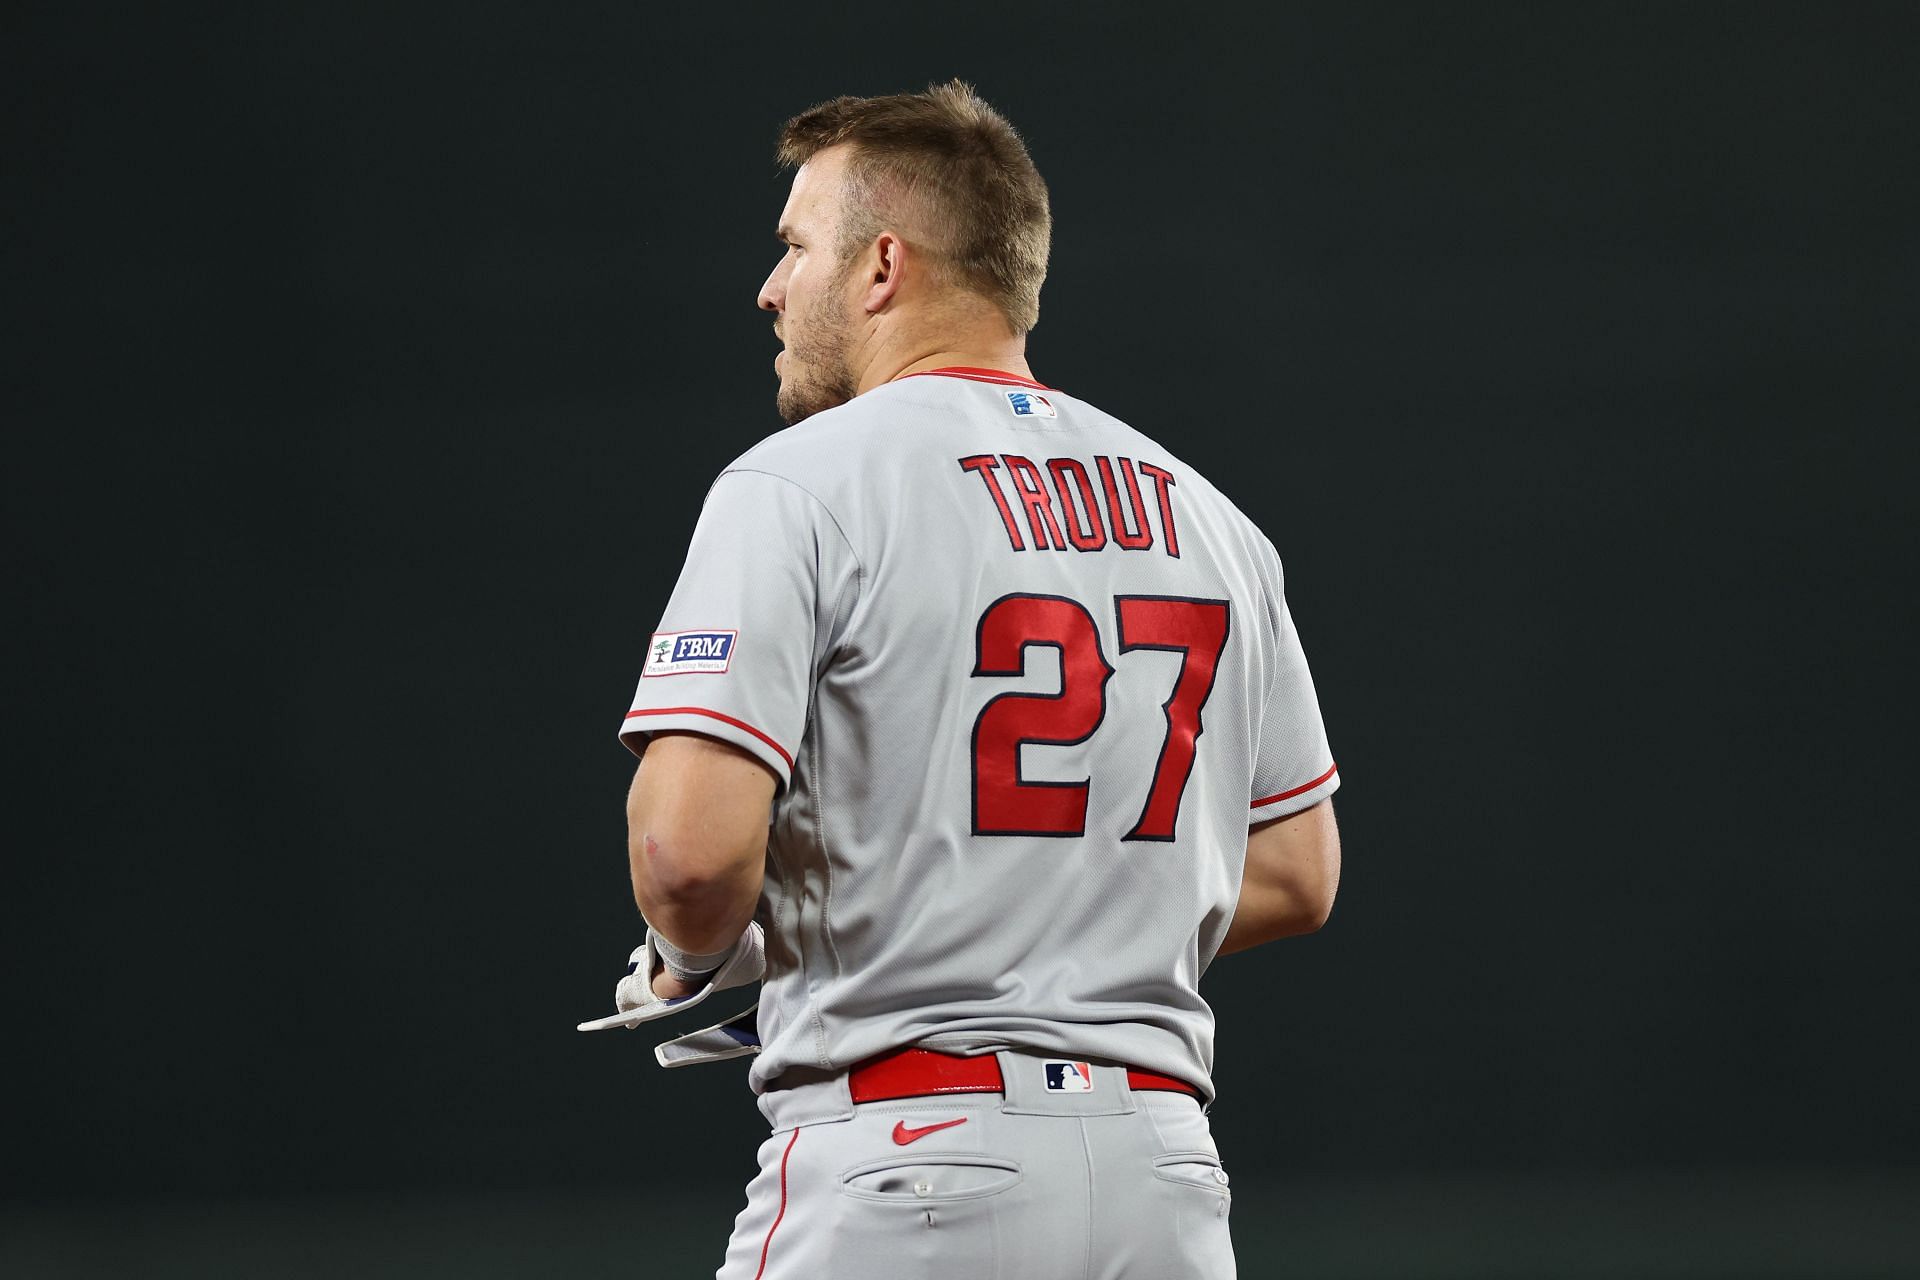 Mike Trout channels Ken Griffey Jr. with his glove, not his bat, in Angels  loss to Mariners – Orange County Register